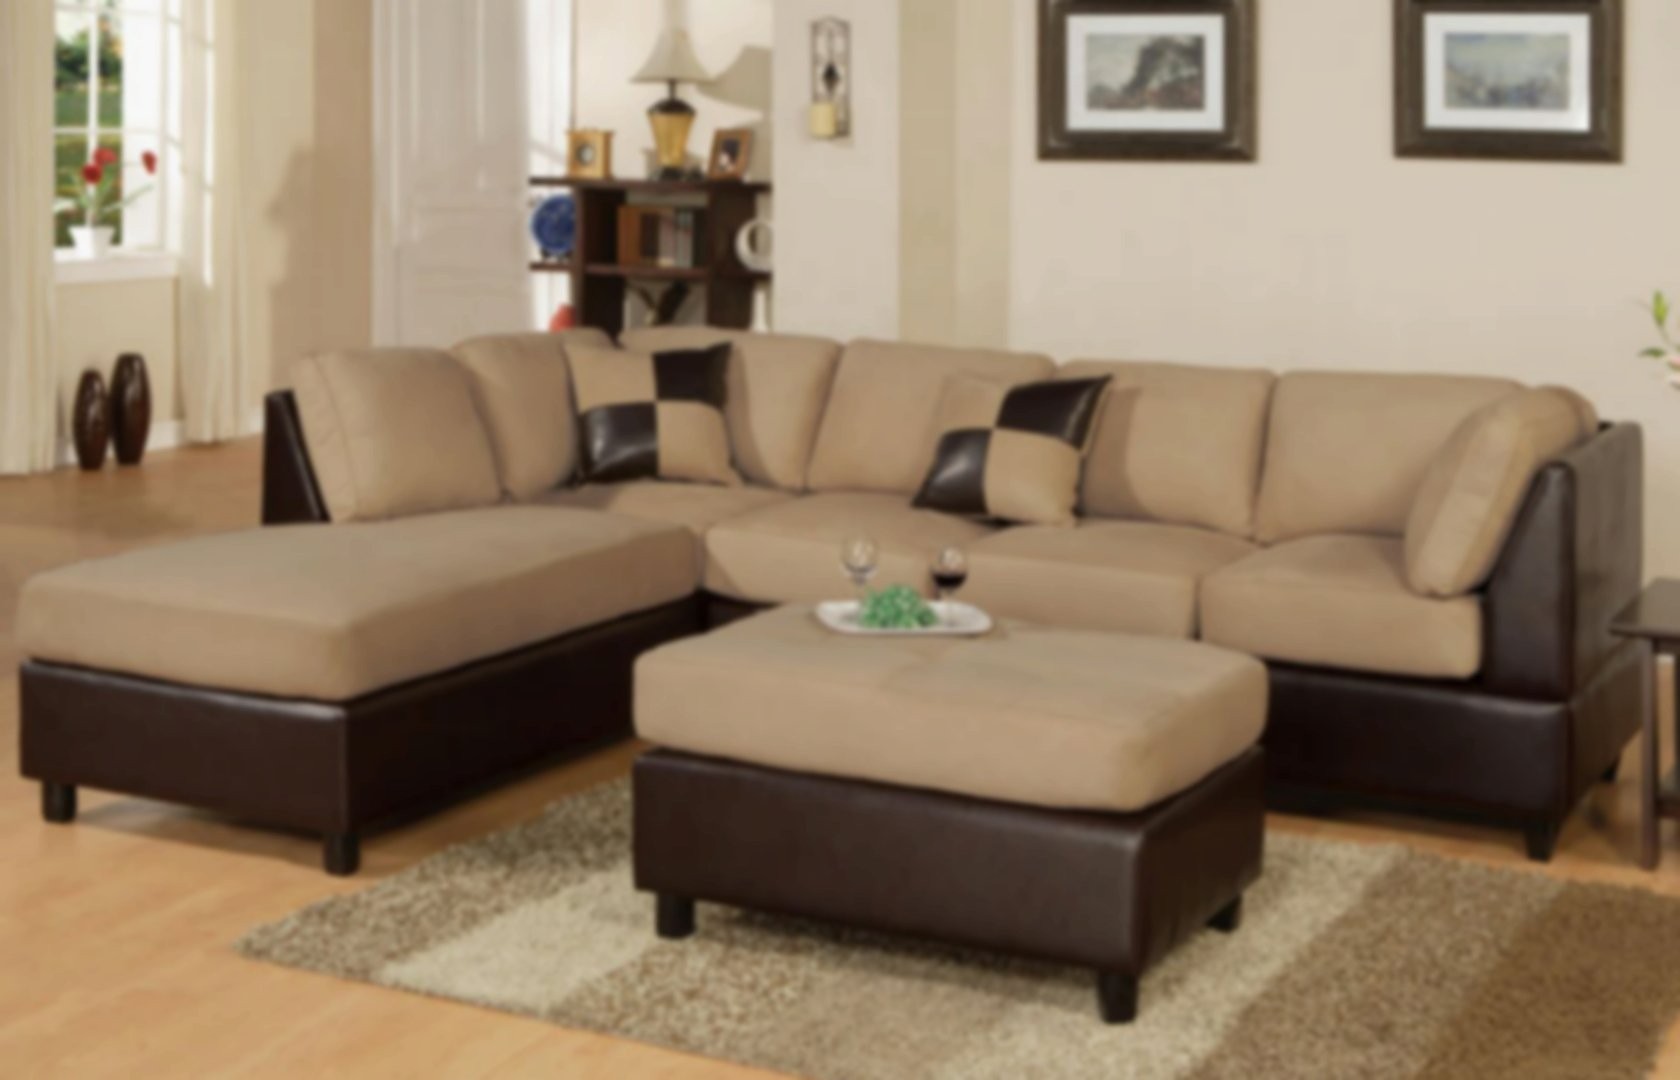 Suede sectional couch